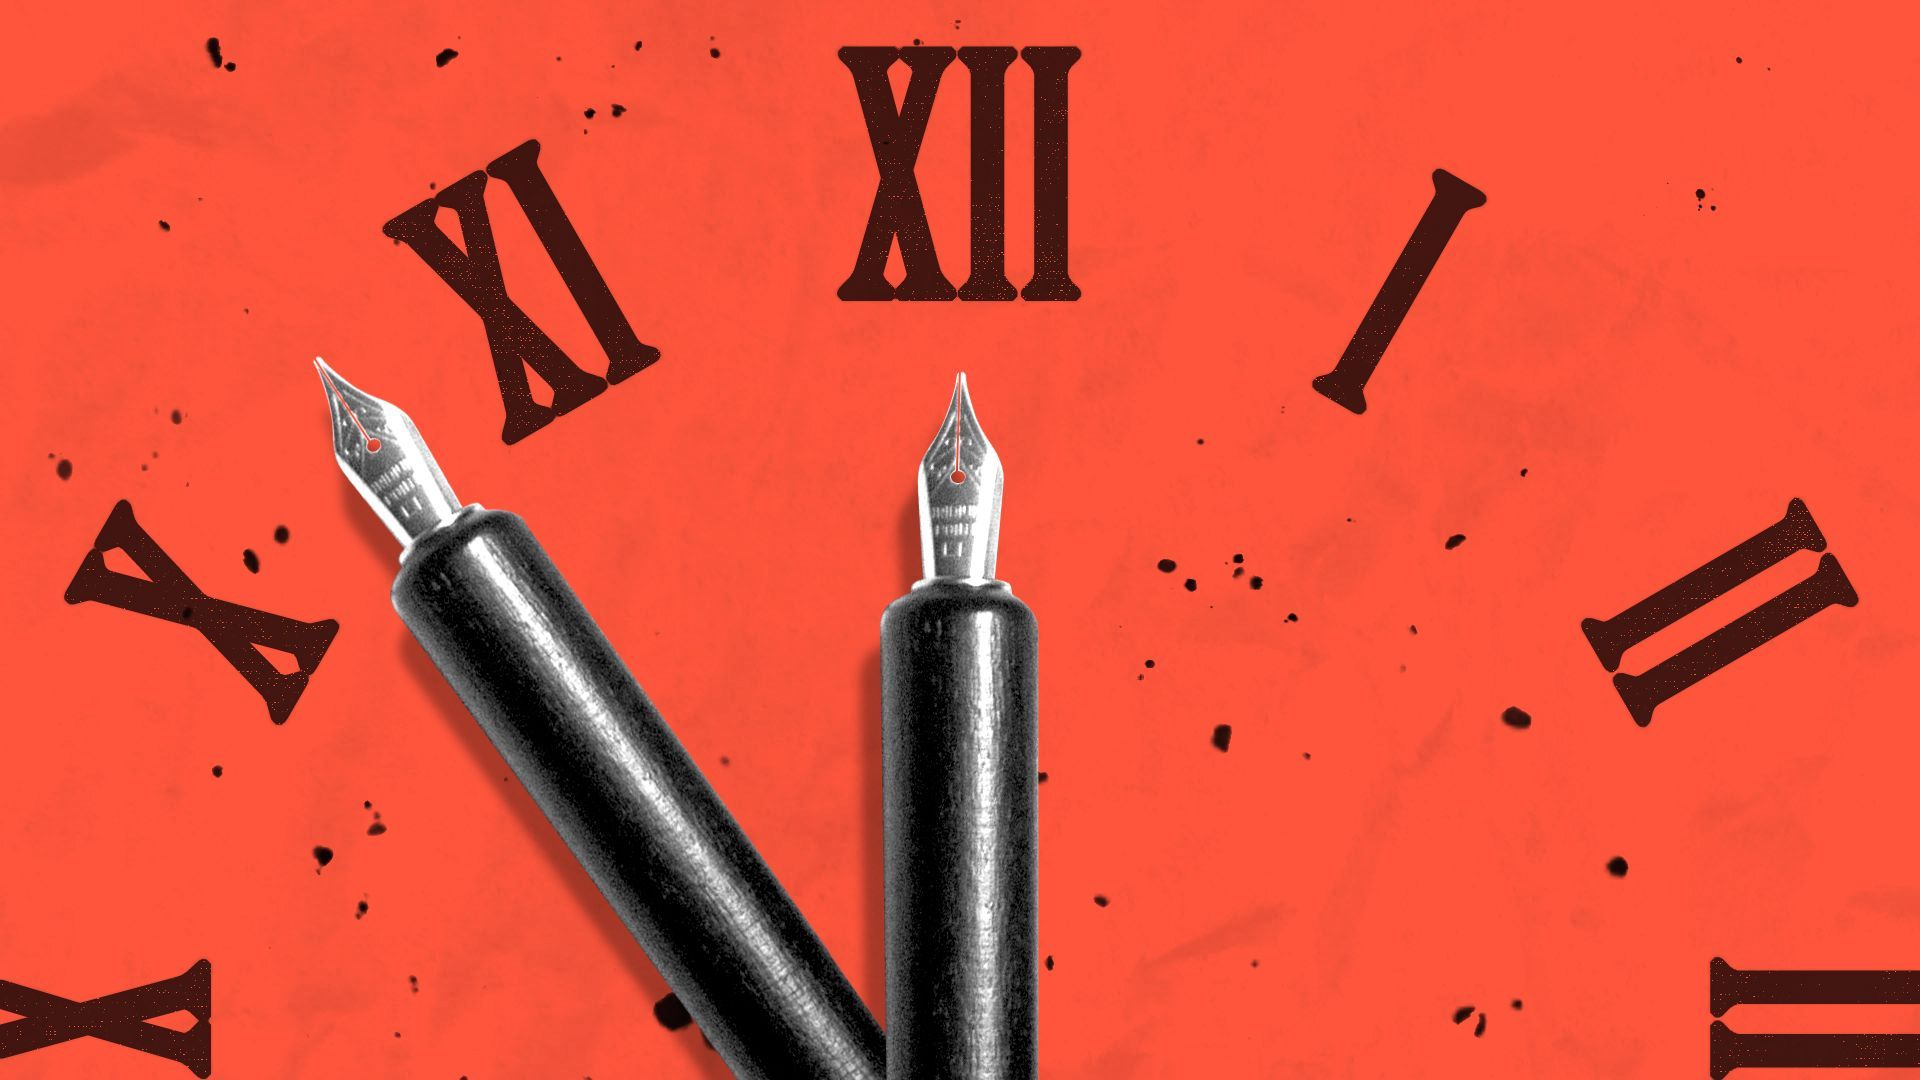 Illustration of a clock face with fountain pens for hands, with ink drops scattered around.